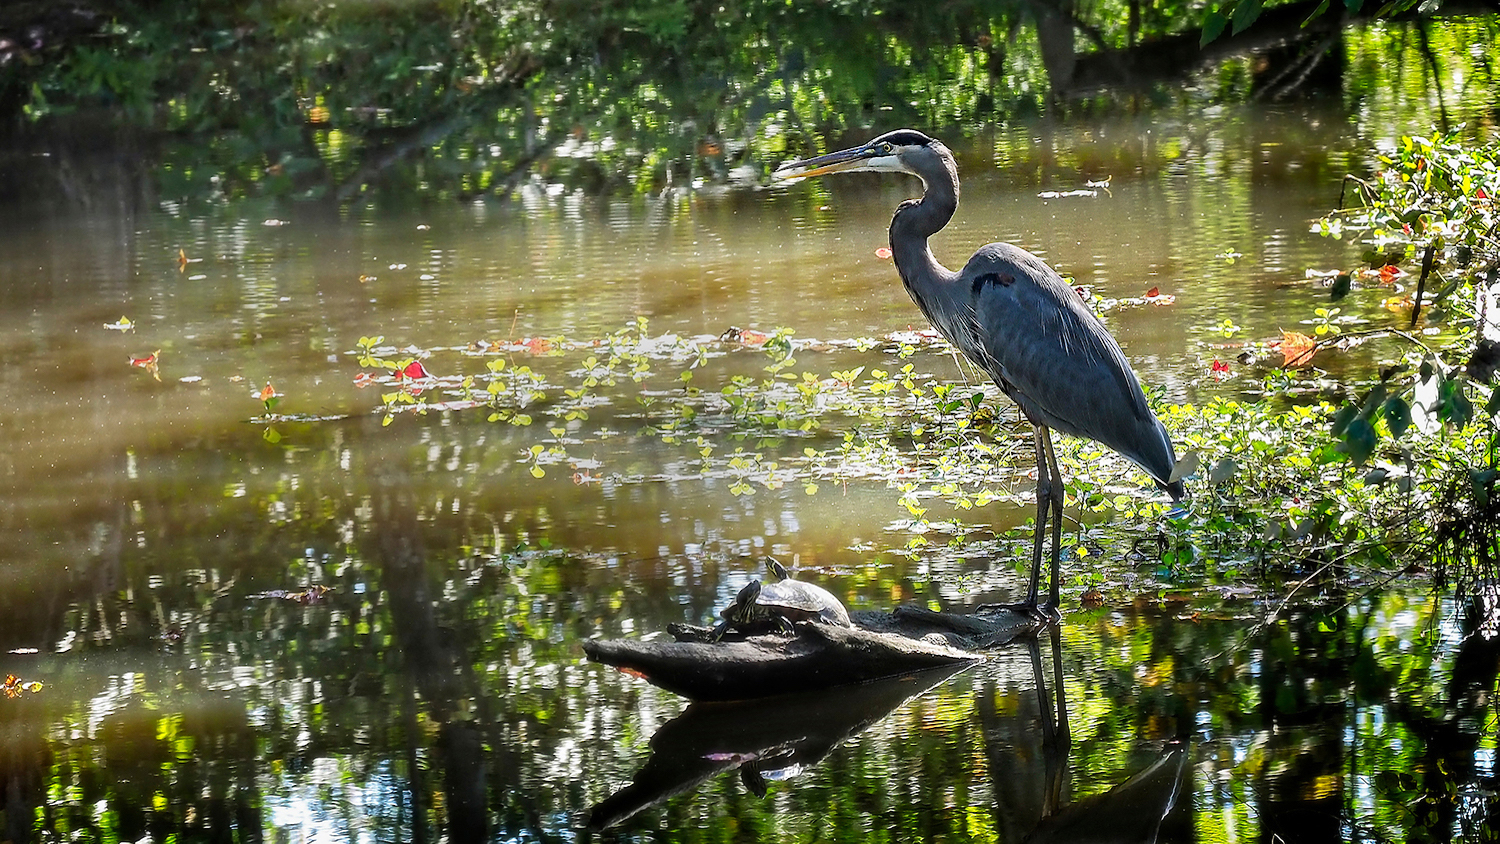 A great blue heron and turtles along a body of water - Ecology Wildlife Foundation Establishes Three Funds to Support Conservation Research - Forestry and Environmental Resources Department at NC State